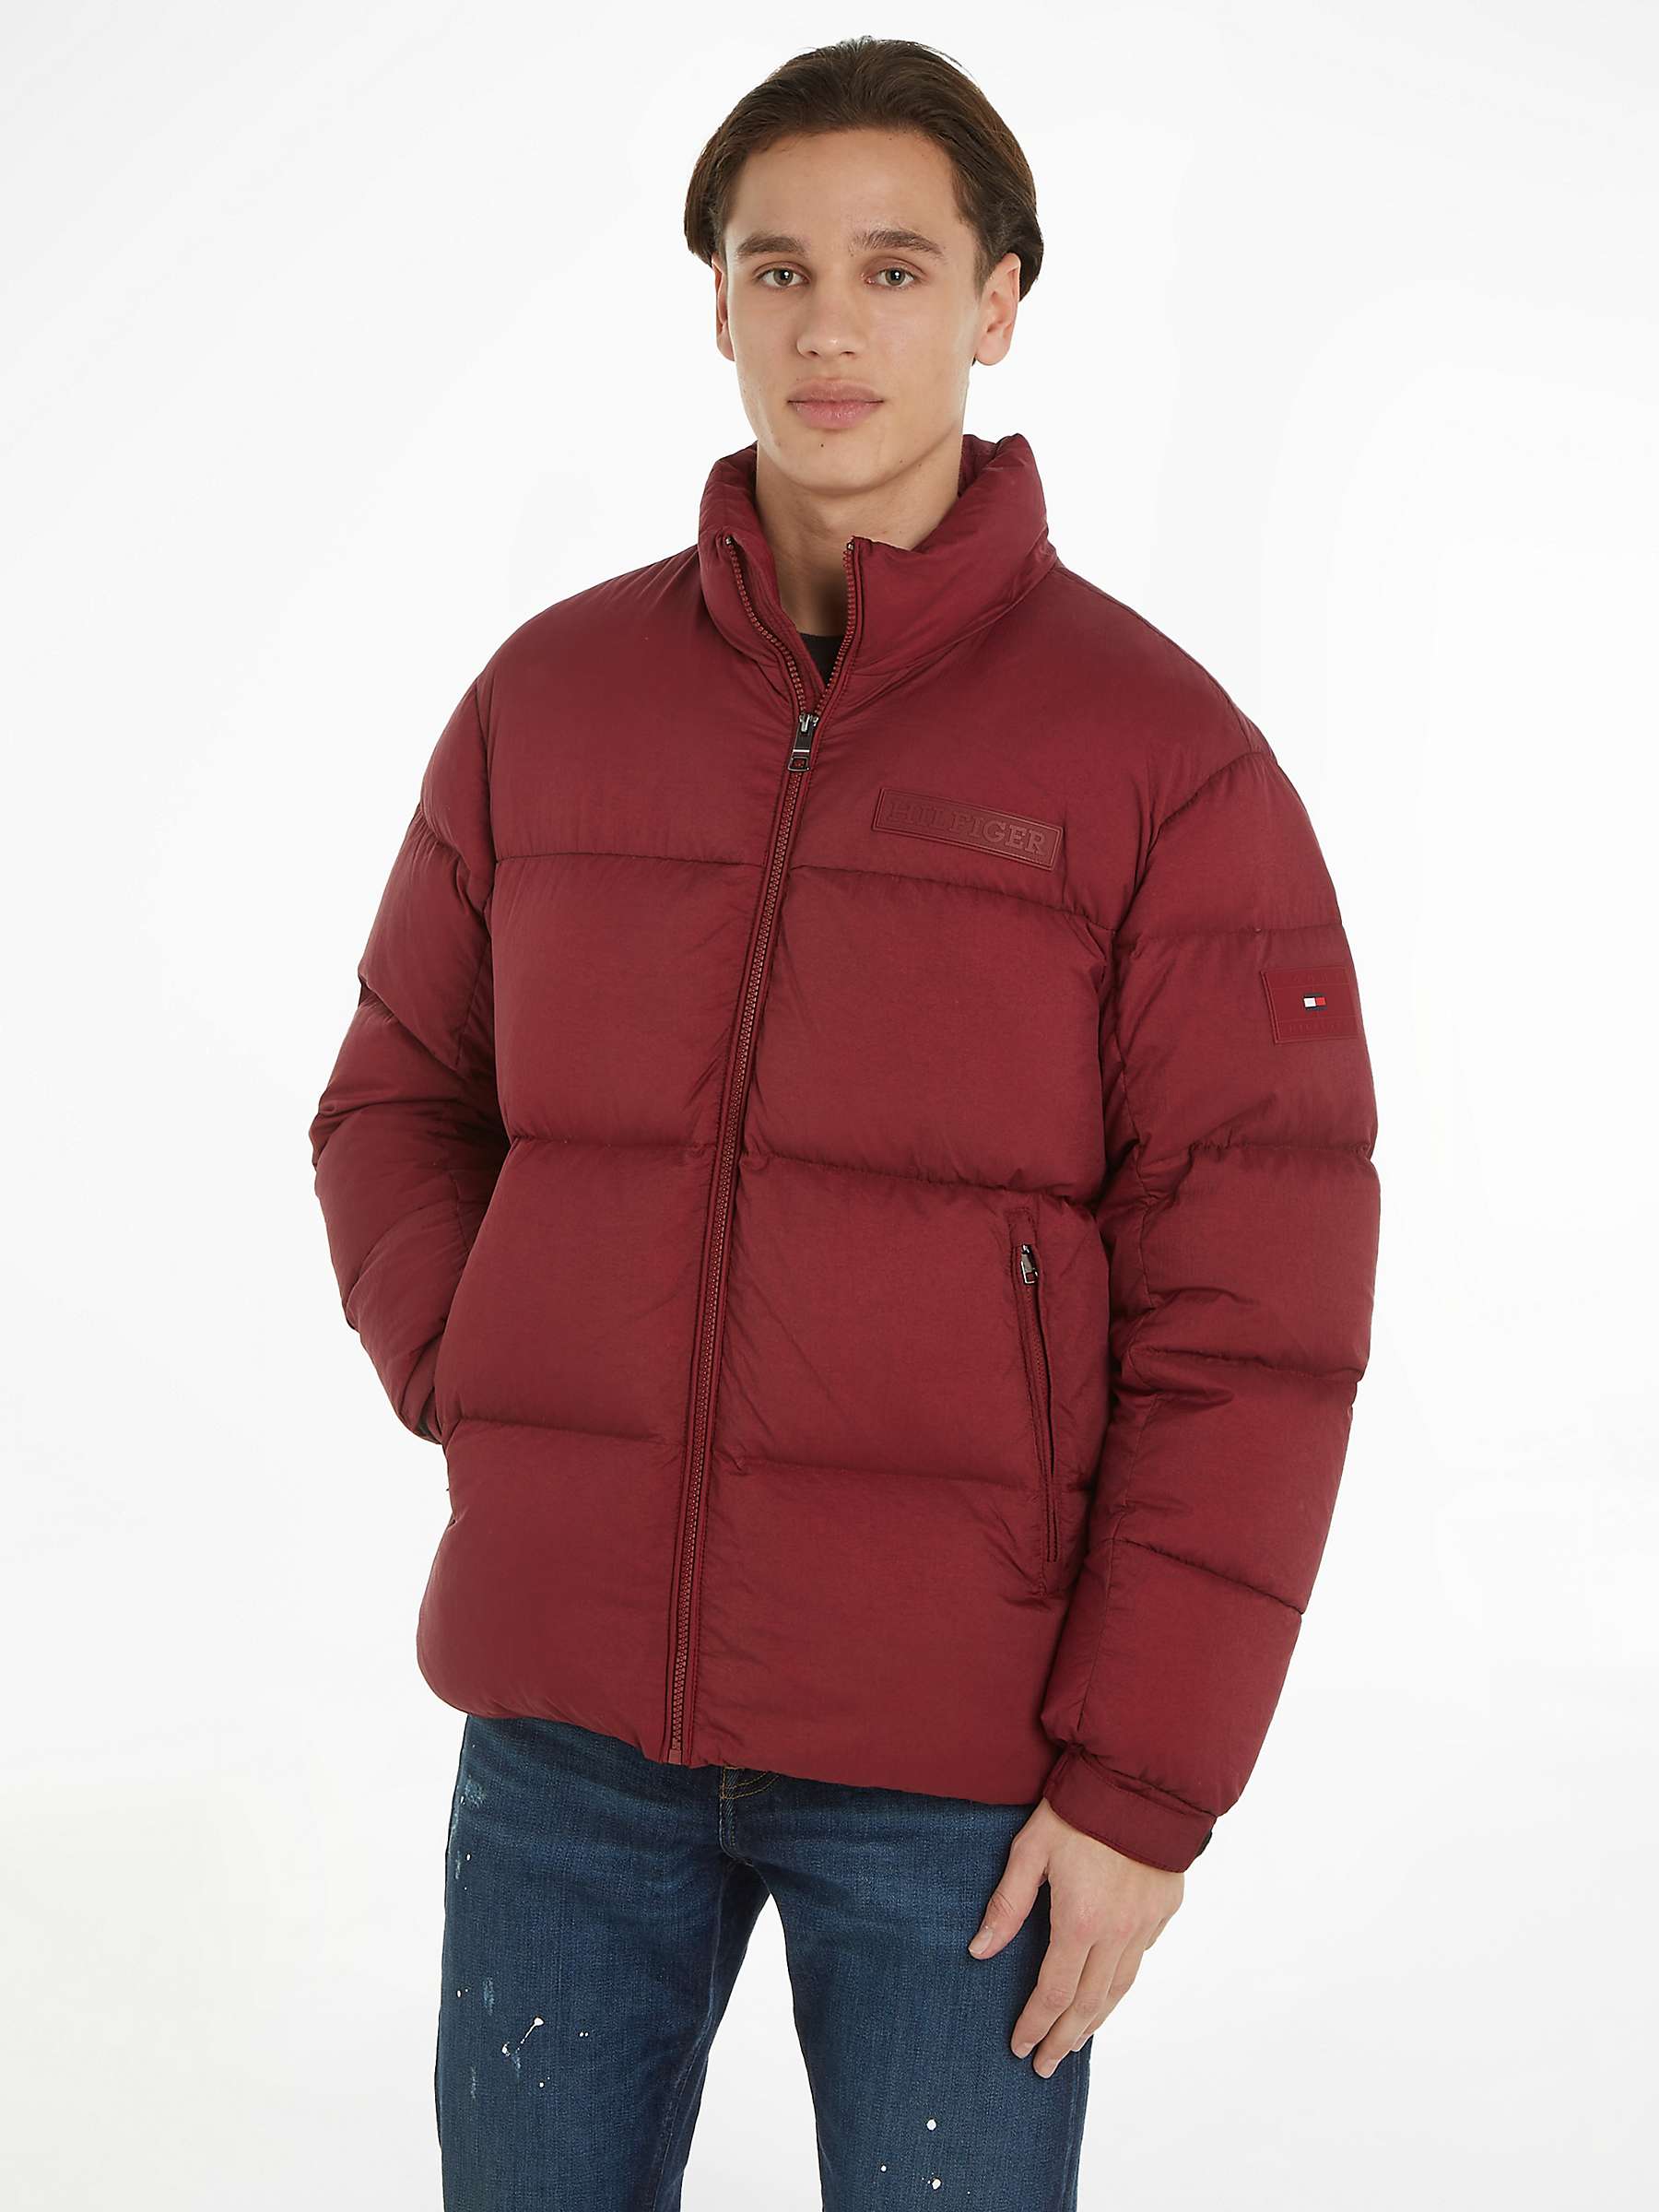 Tommy Hilfiger New York Down Puffer Jacket, Red at John Lewis & Partners